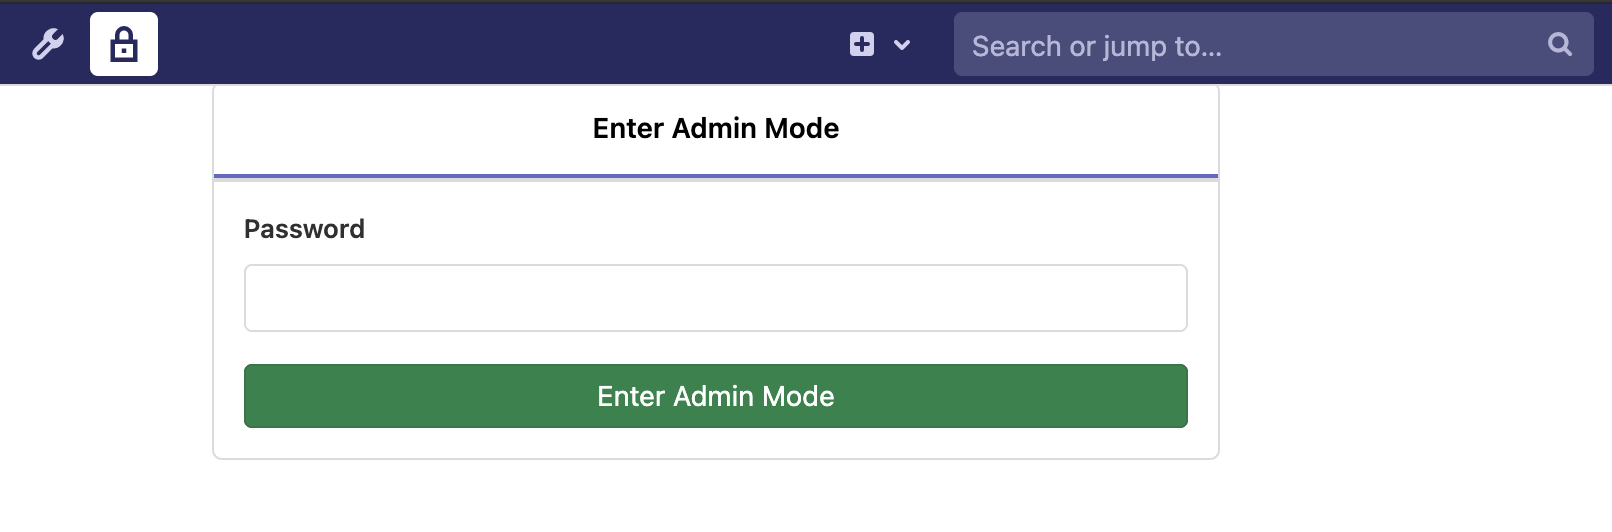 Admin Mode: Re-authenticate for GitLab administration